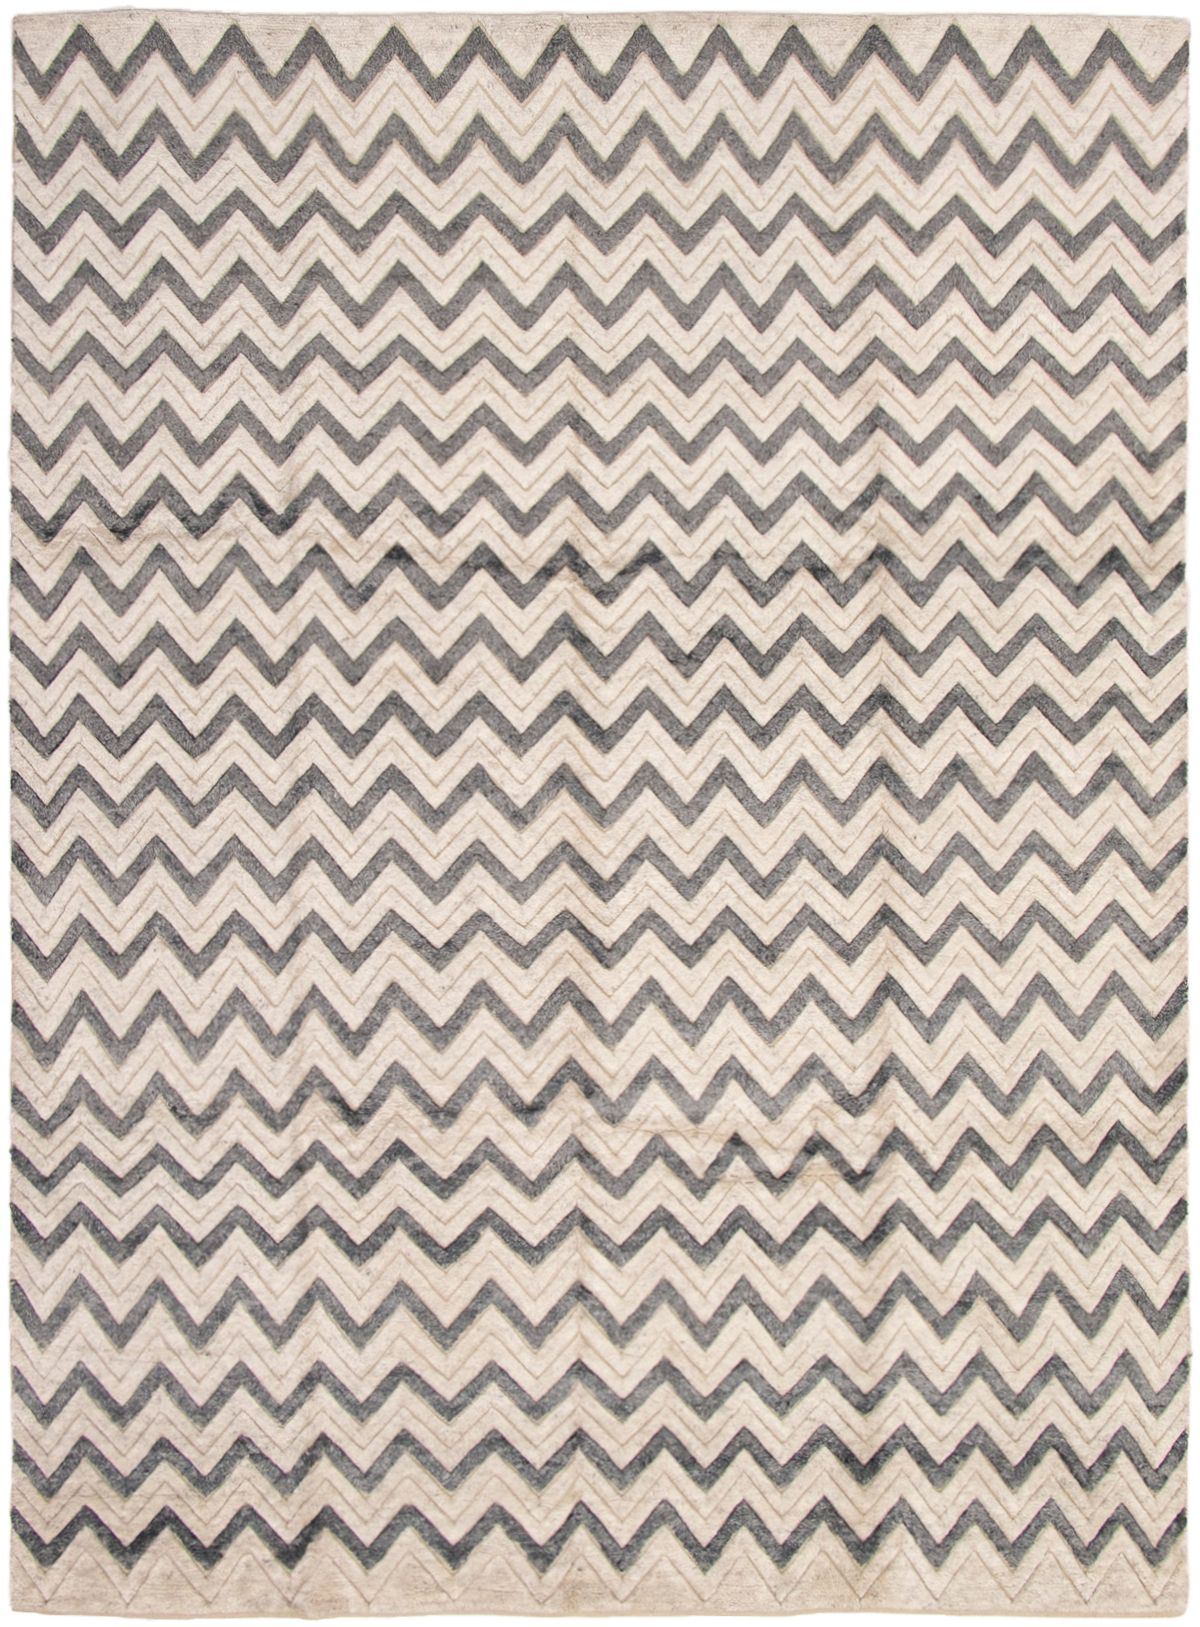 Hand-knotted Arlequin Cream Wool Rug 9'0" x 12'1" Size: 9'0" x 12'1"  